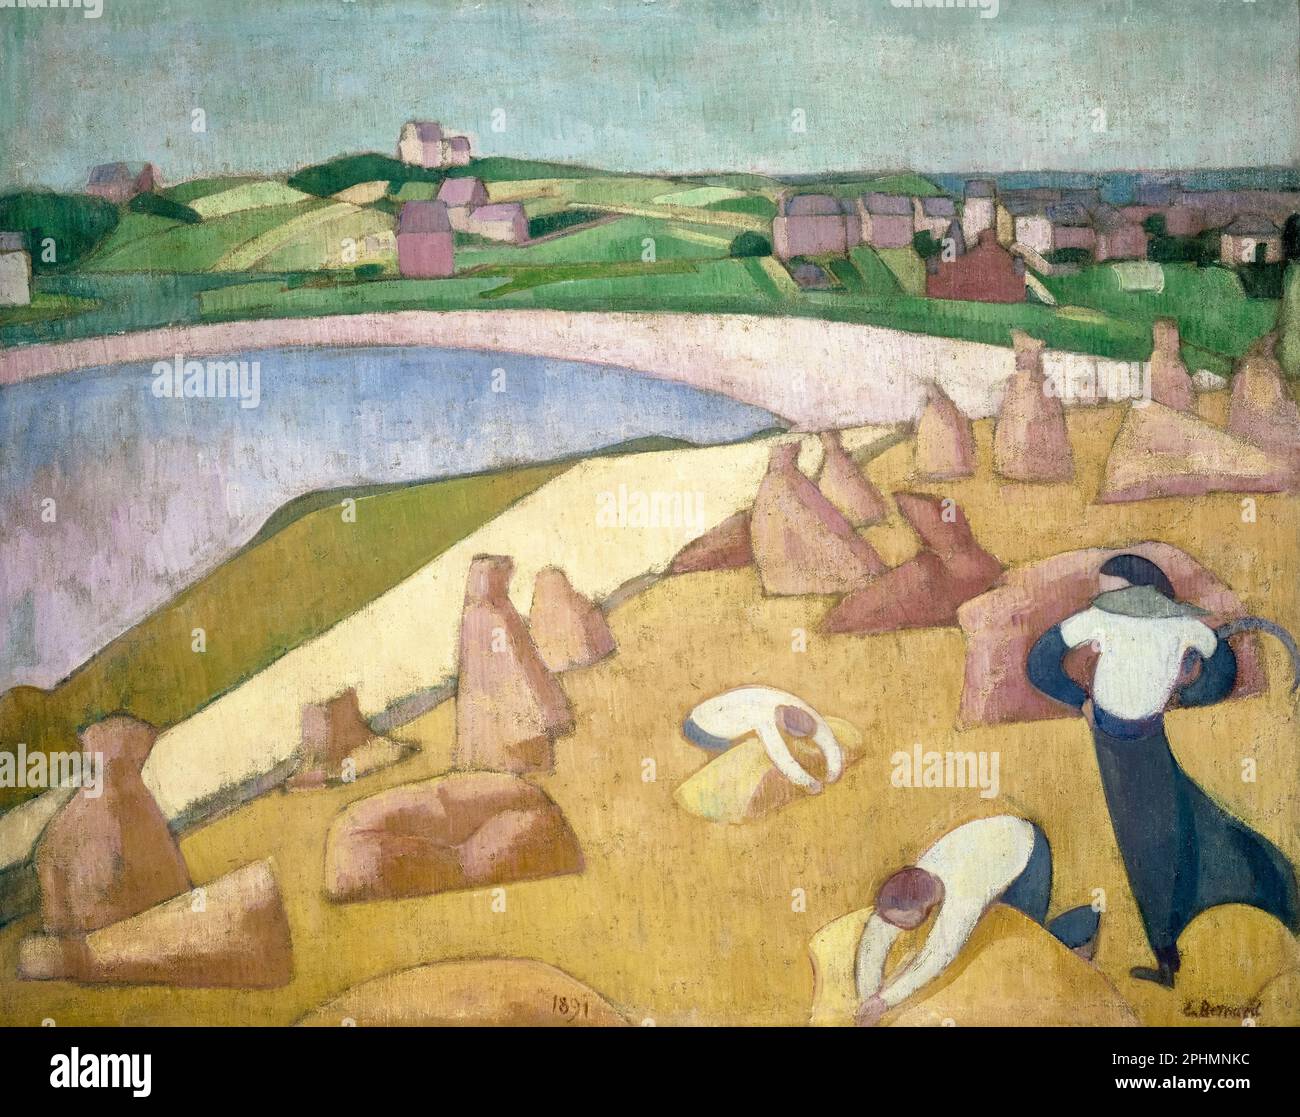 Emile Bernard, Harvest by the Sea, painting in oil on canvas, 1891 Stock Photo